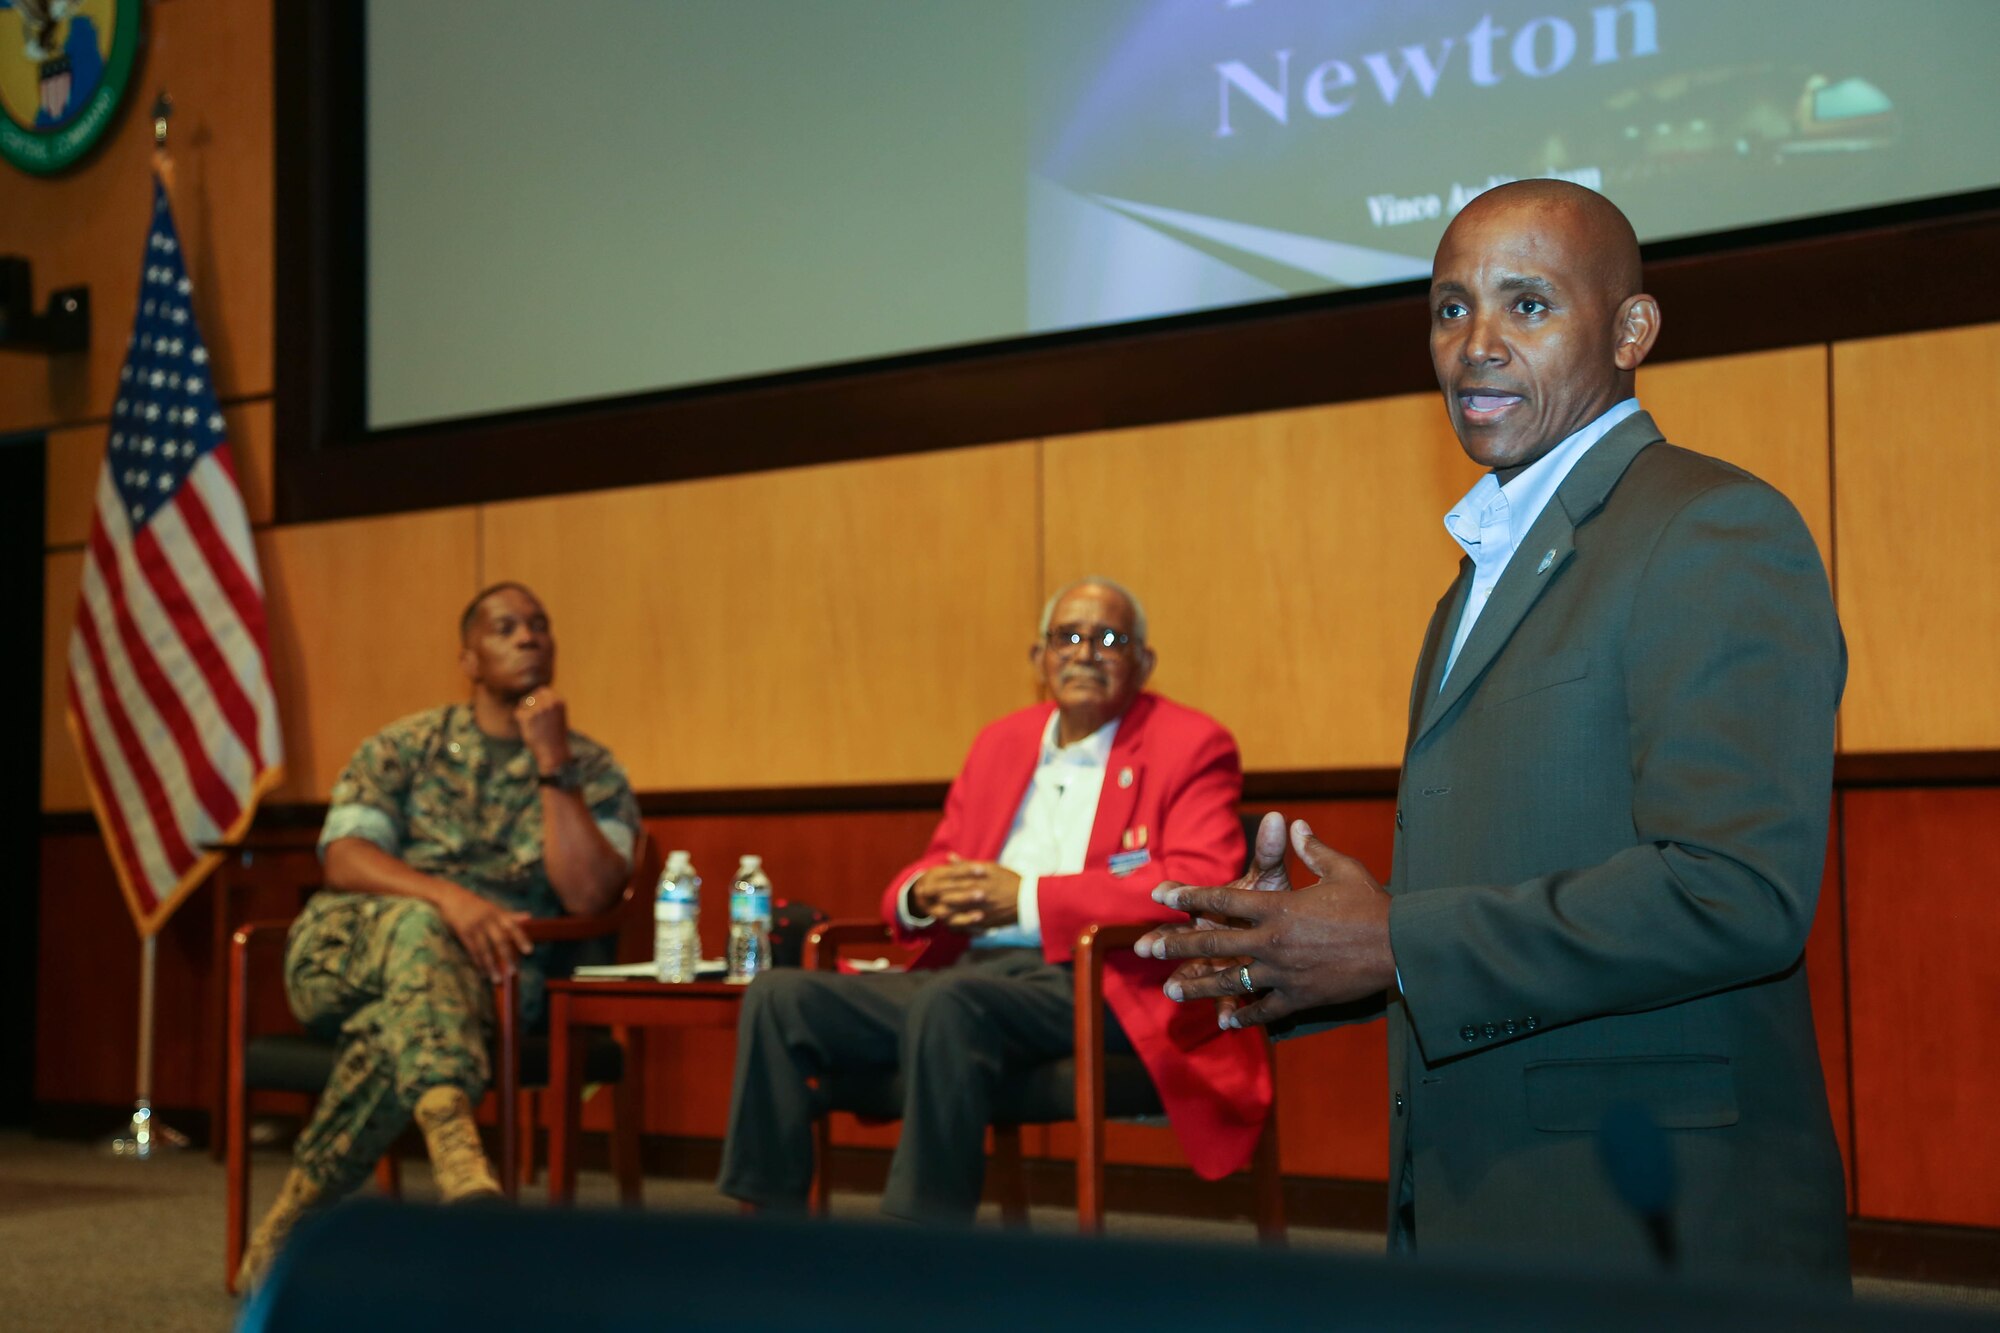 Retired U.S. Air Force Tech. Sgt. Stevie Carmack answers questions about his father’s role in his decision to join the military for a packed audience of U.S. Central Command personnel in the Vince Tolbert Building, MacDill Air Force Base, July 9, 2021. Carmack encouraged his father to become a certified Documented Original Tuskegee Airman, which officially certified that U.S. Army Air Forces Sgt. Thomas Newton served with the historically significant 99th Fighter Squadron. (U.S. Army photo by Spc. Robert Vicens)